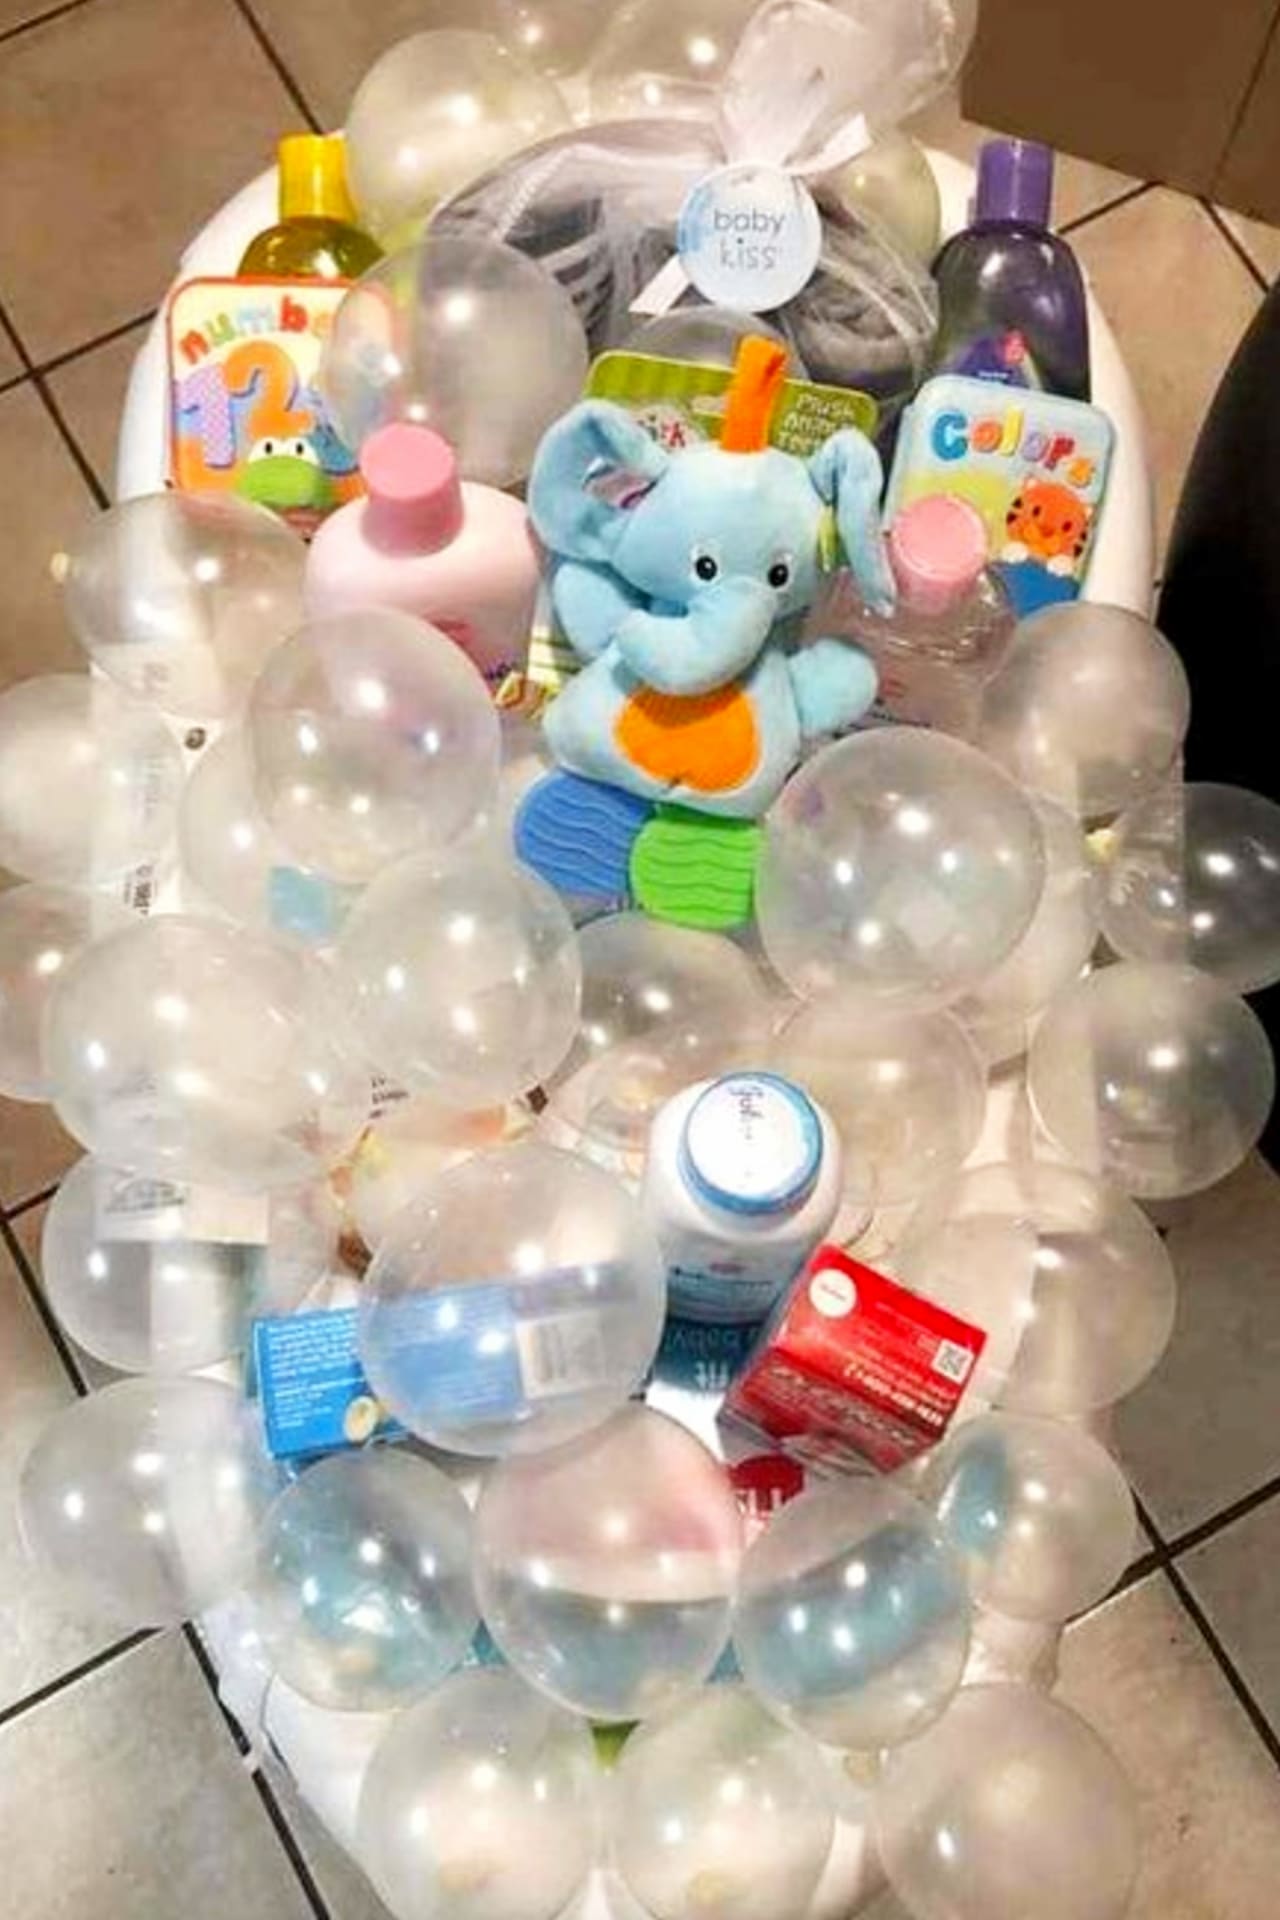 Baby Shower Gift Ideas!  DIY baby shower gifts - Unique, creative DIY baby shower gift baskets and baby bathtub gift baskets to make cheap - Dollar Stores DIY baby shower gifts for boys, girls and gender neutral / gender unknown